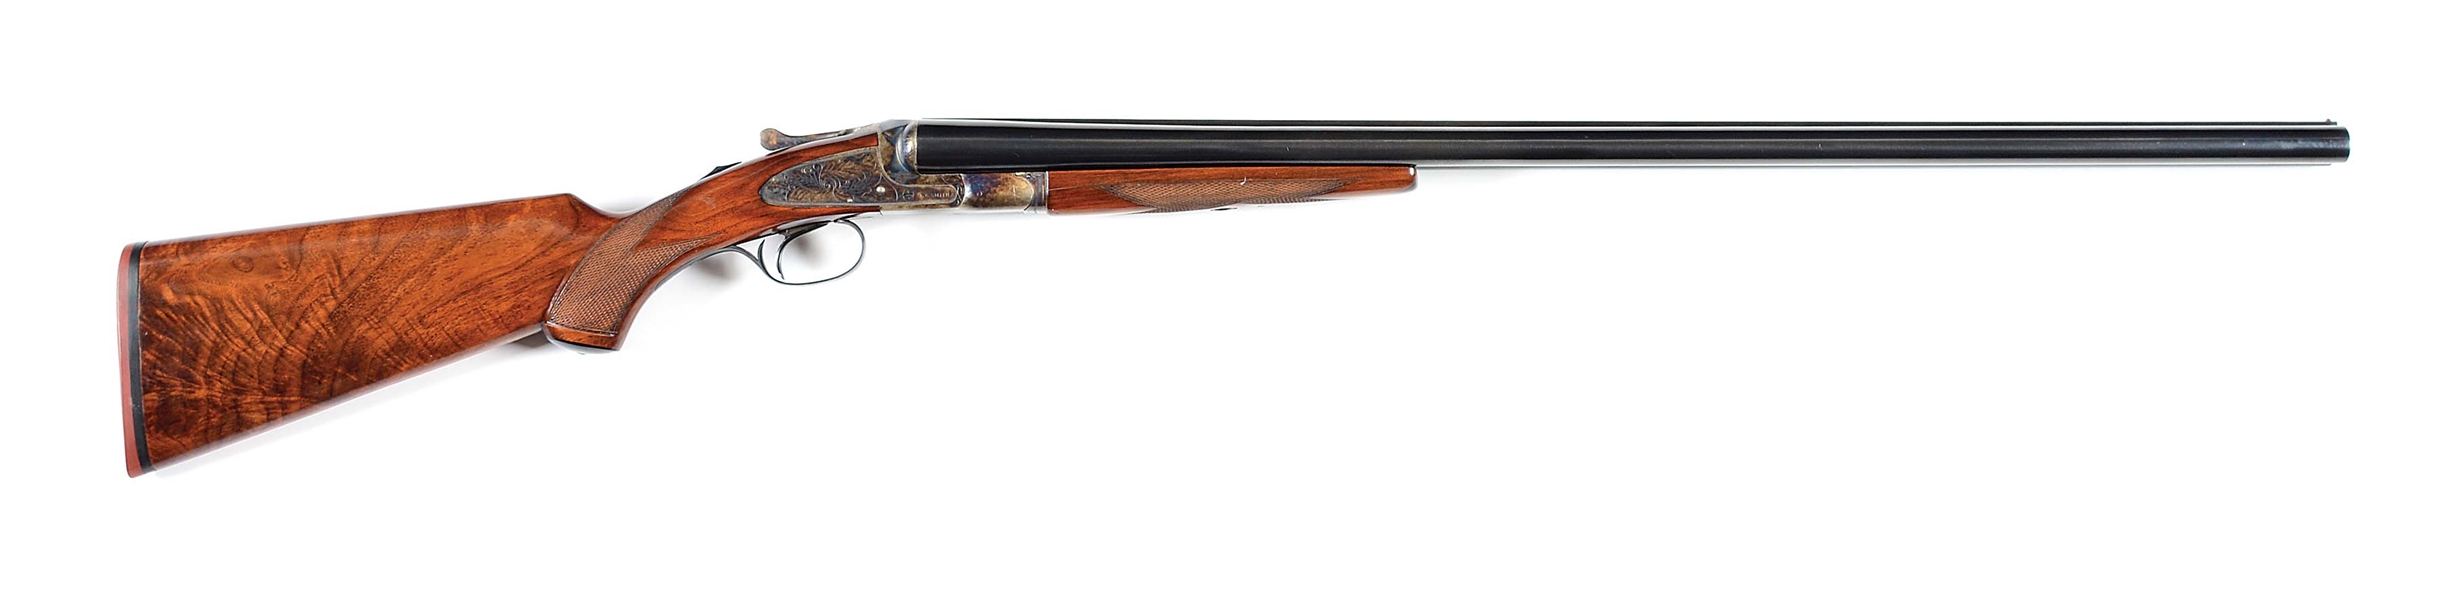 (C) LC SMITH IDEAL GRADE SIDE BY SIDE SHOTGUN.